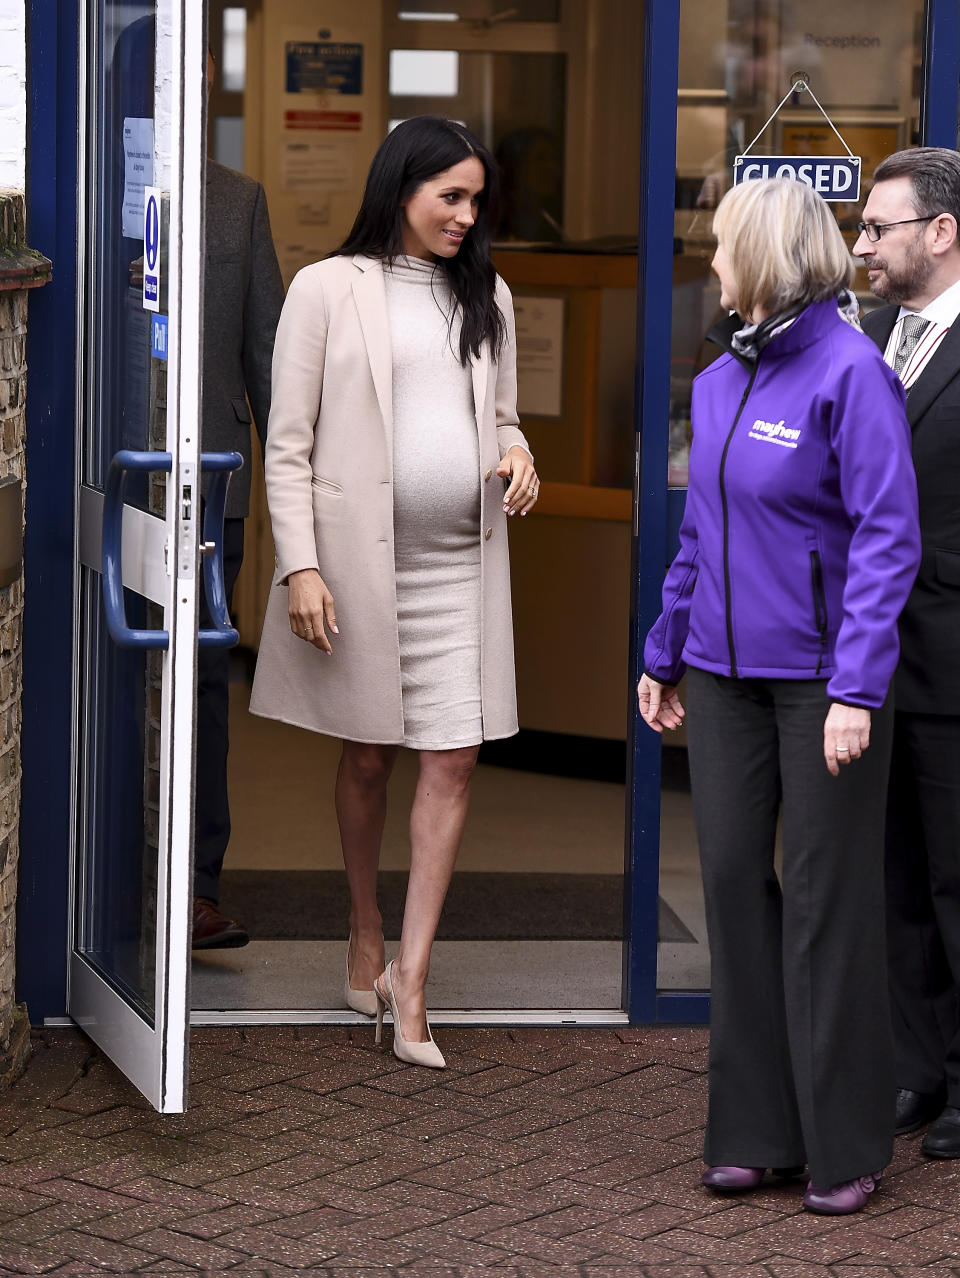 Meghan wore a $45 dress from H&M for the visit [Photo: Getty]